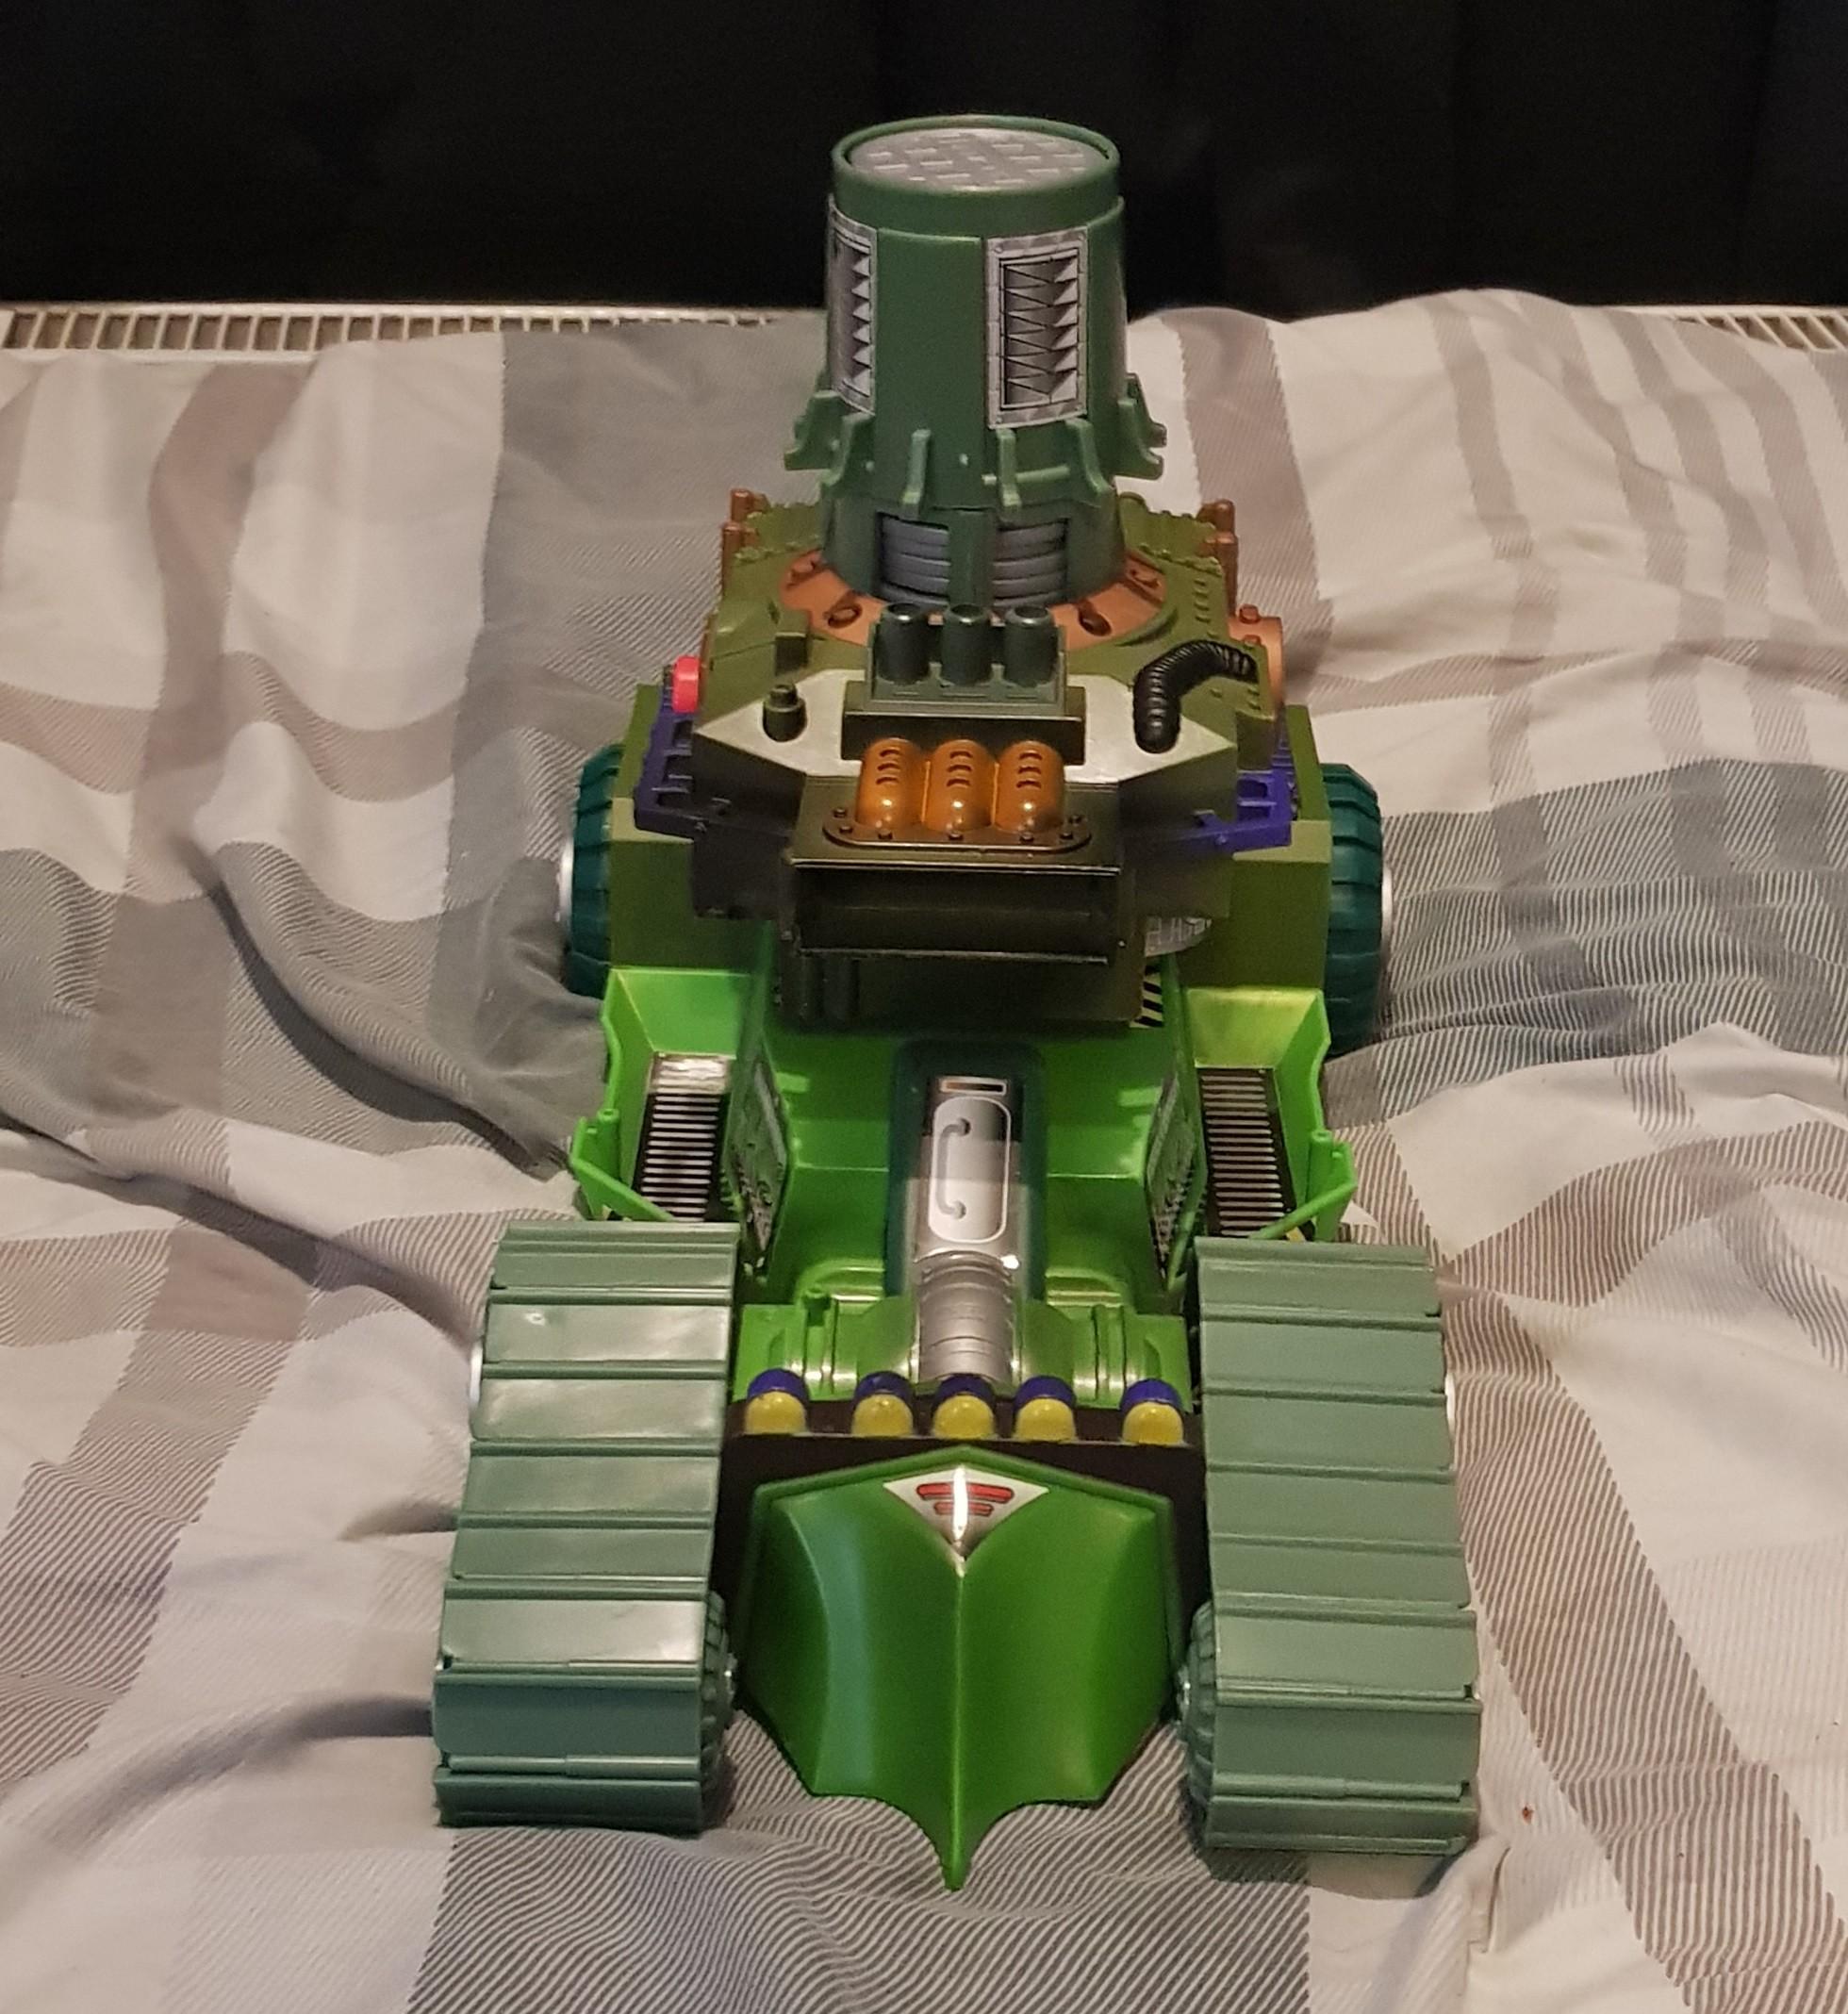 TMNT Sewer Lid Launcher in S71 Barnsley for £49.99 for sale | Shpock